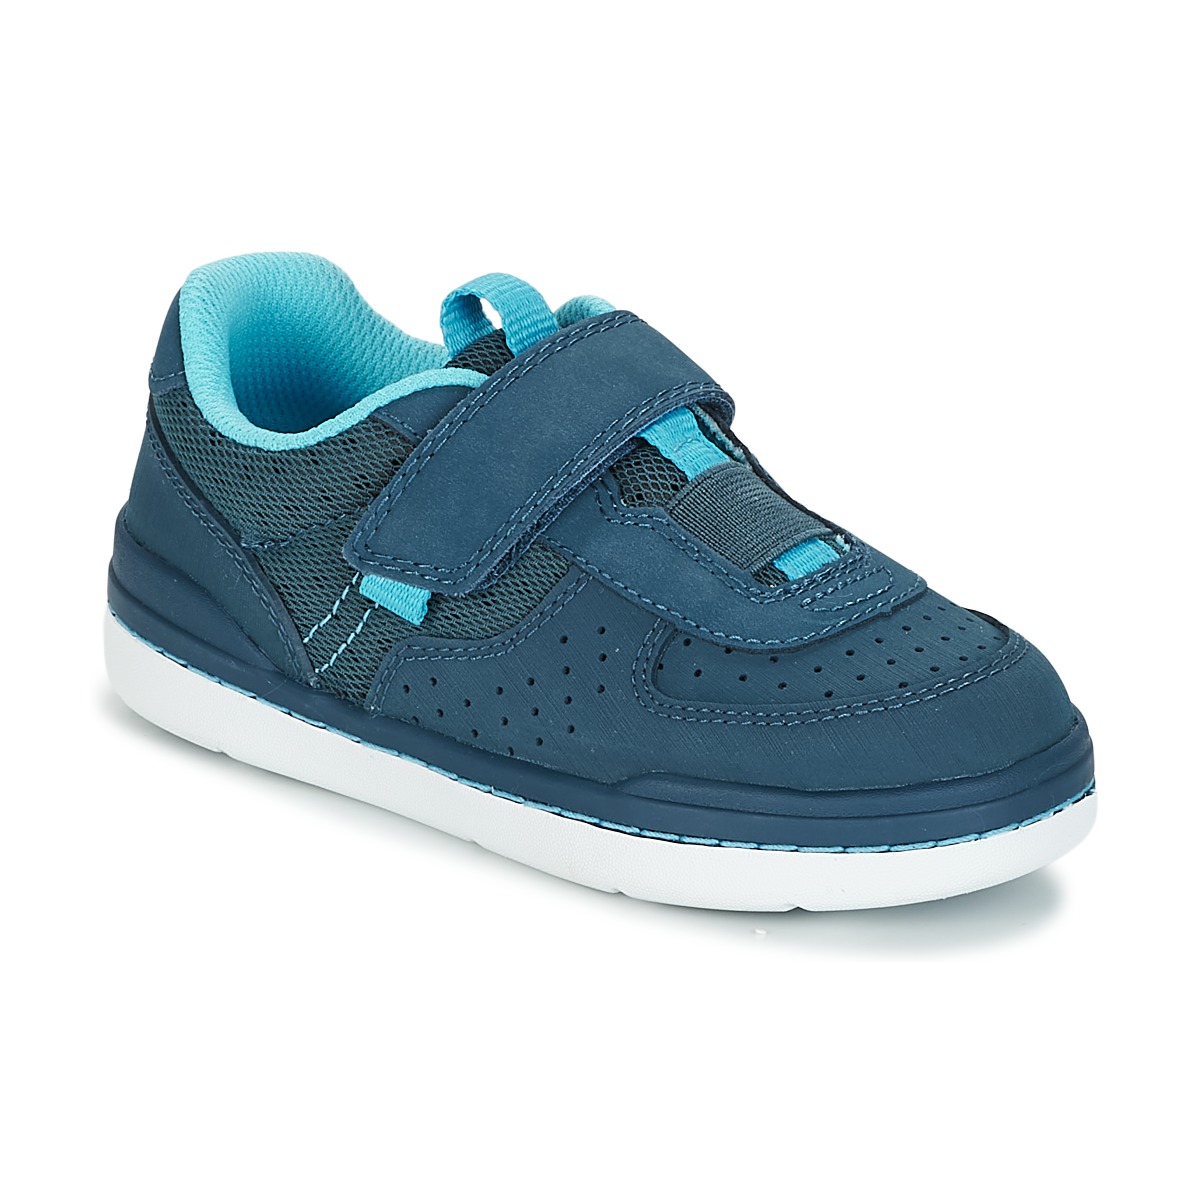 Shoes Boy Low top trainers Start Rite FLOW Navy